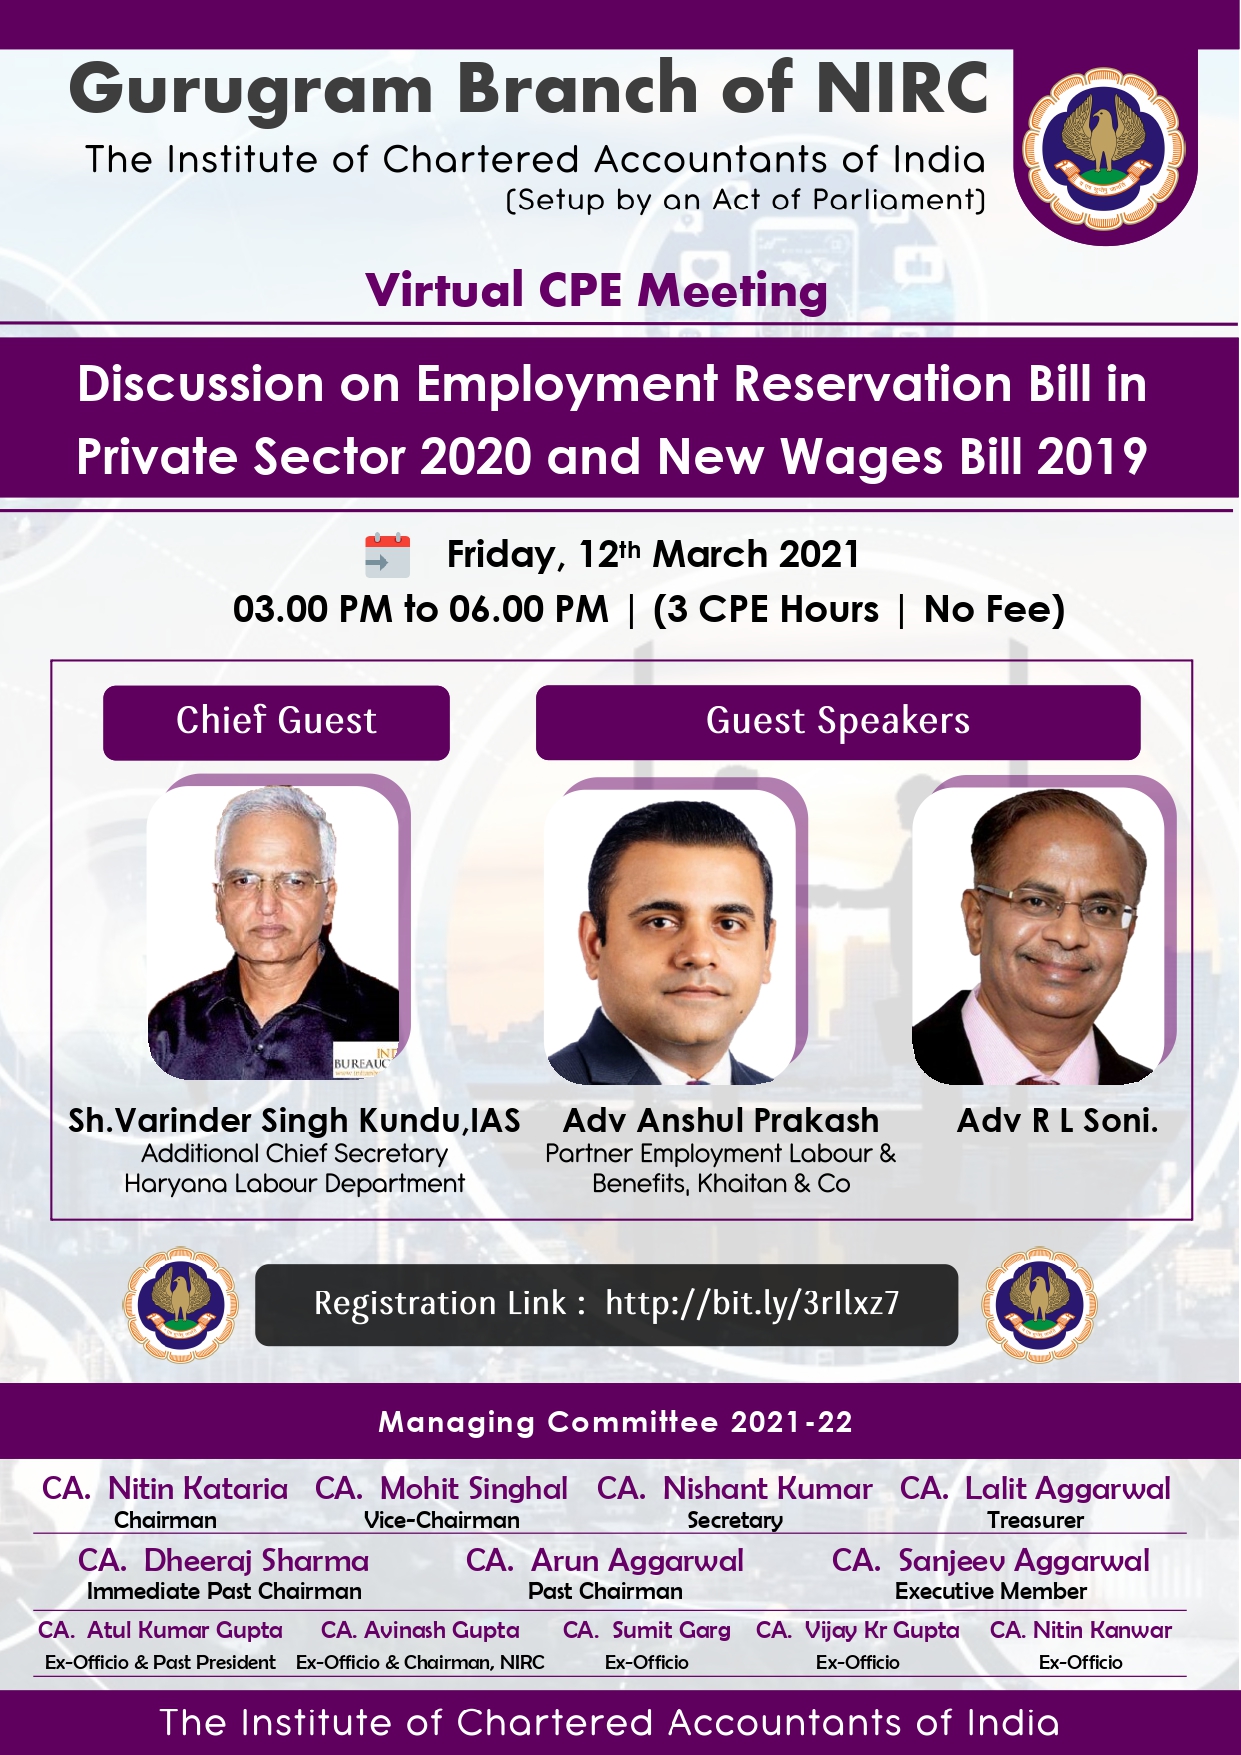 Discussion on Employment Reservation Bill in Private Sector 2020 and New Wages Bill 2019